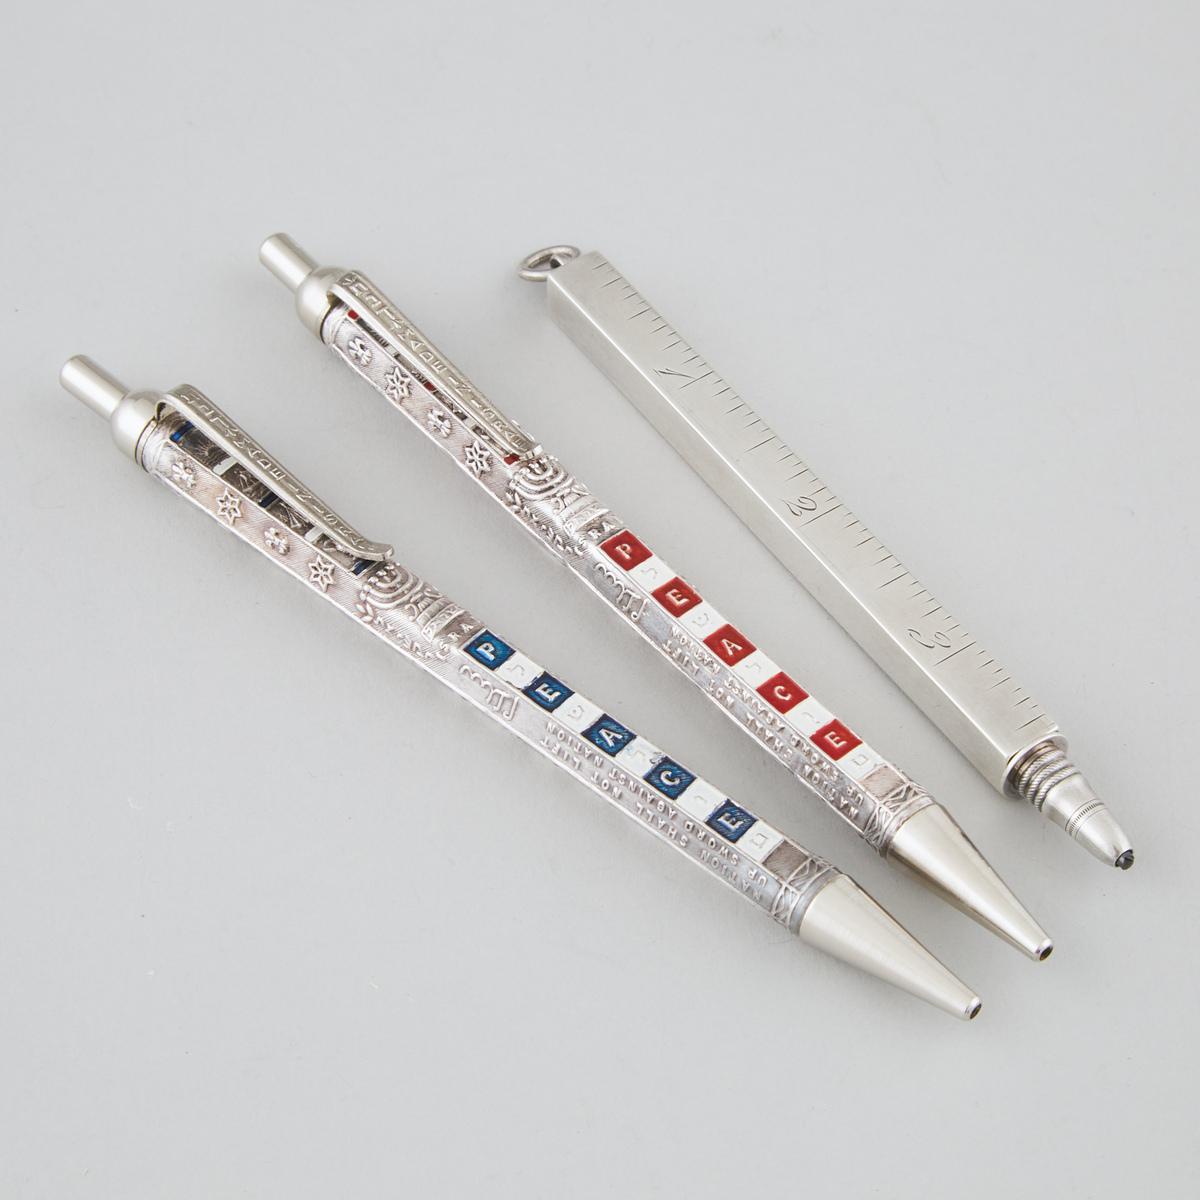 American Silver Extending 12-Inch Ruler Propelling Pencil, Edward Todd & Co., New York, N.Y., and Tw